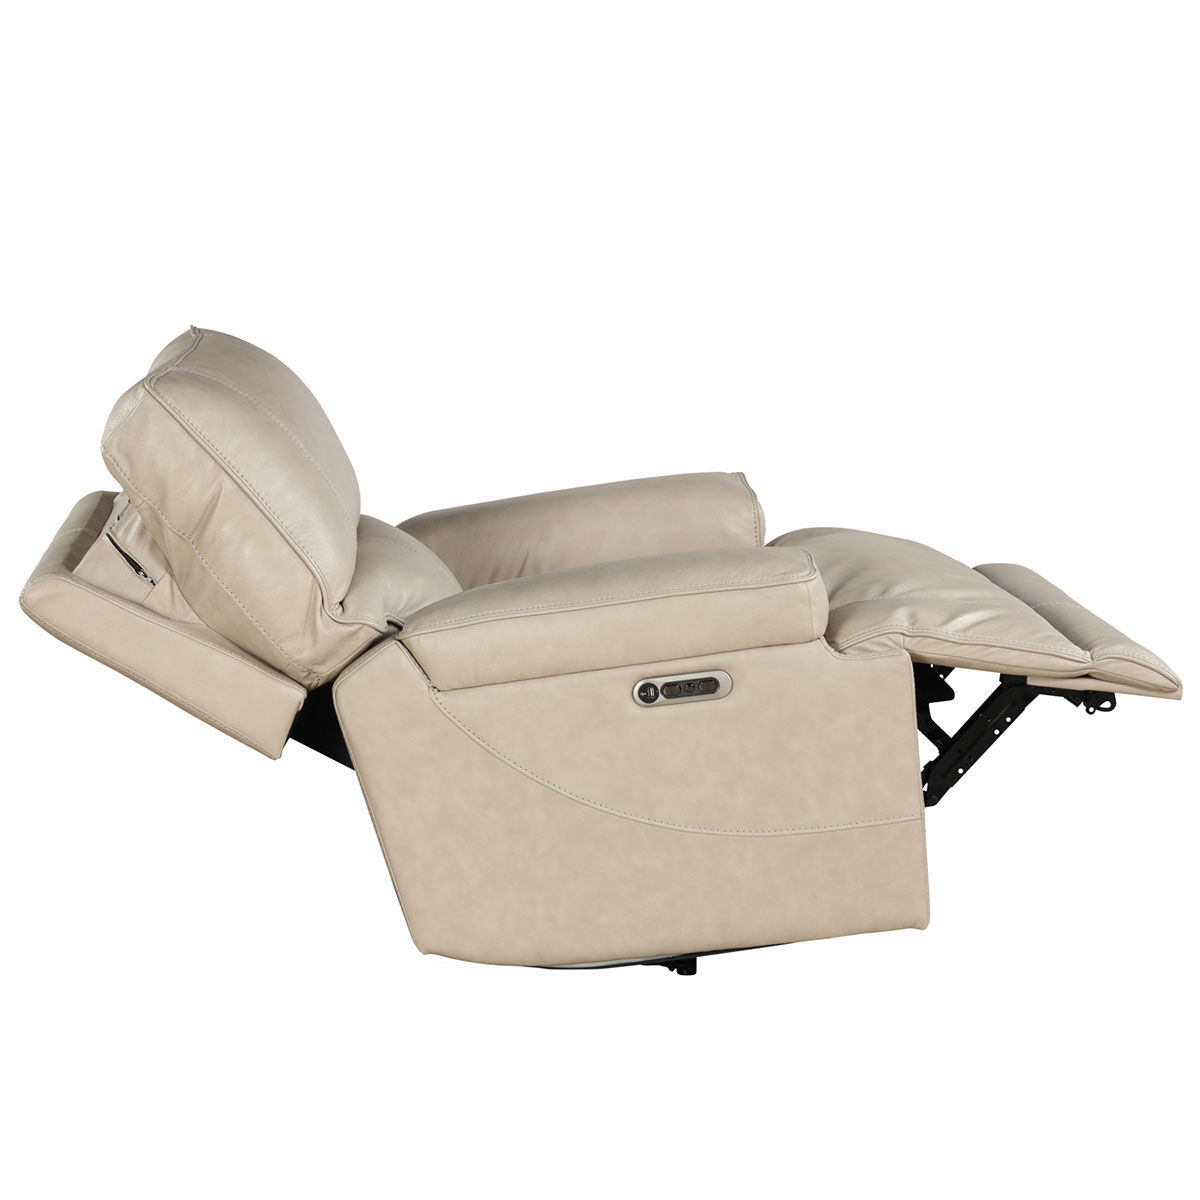 Picture of WHISTLER CORDLESS RECLINER W/ POWER HEADREST IN LINEN